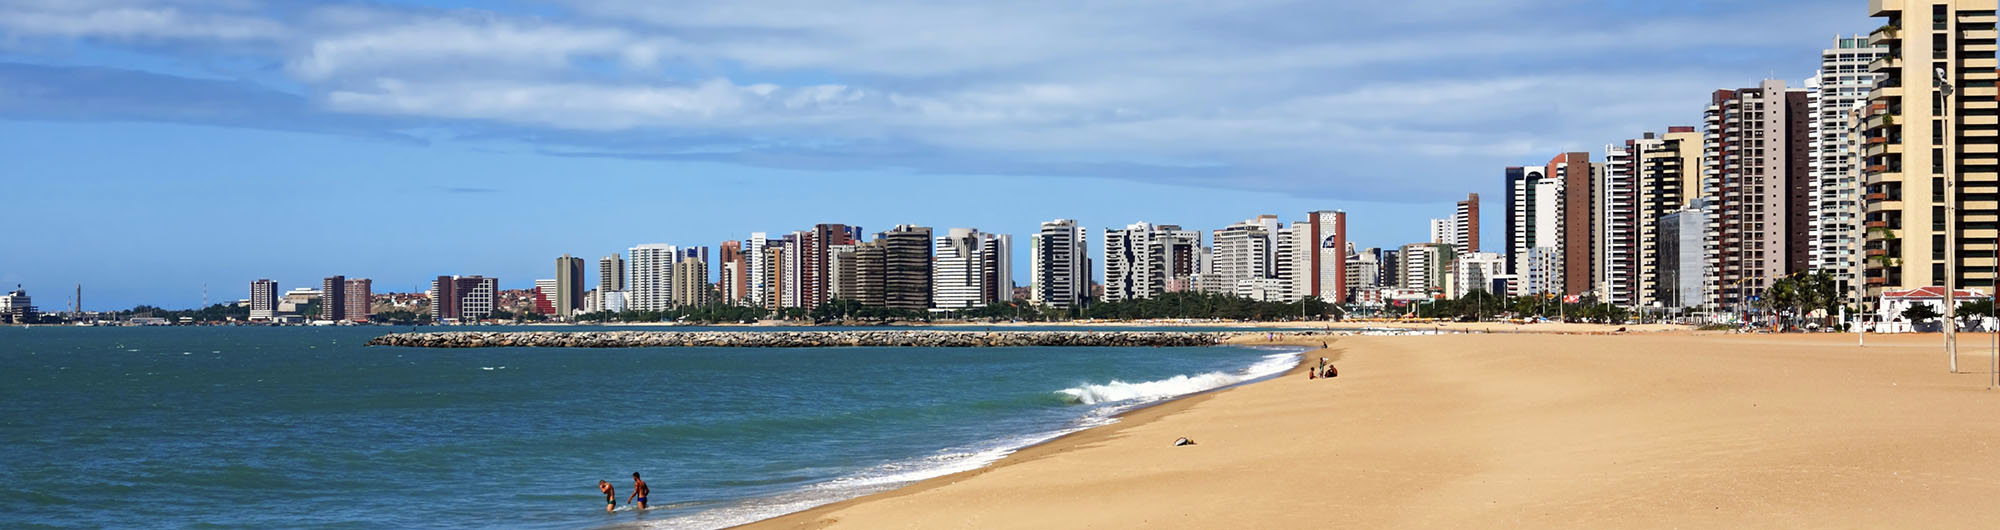 Search and compare cheap flights from São Paulo to Fortaleza